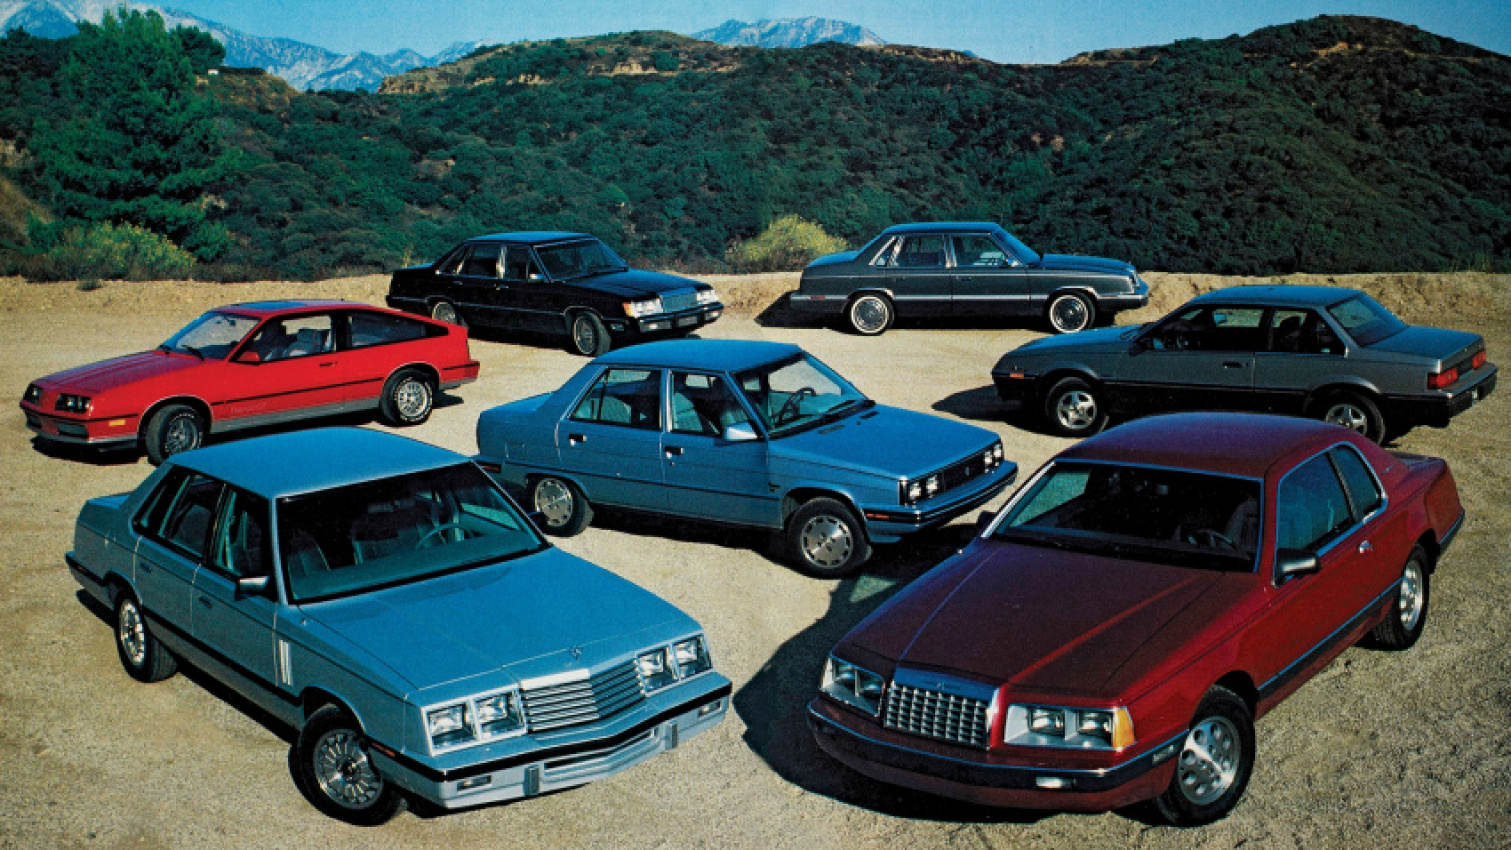 autos, cars, features, renault, why the awful, no good renault alliance was our 1983 car of the year